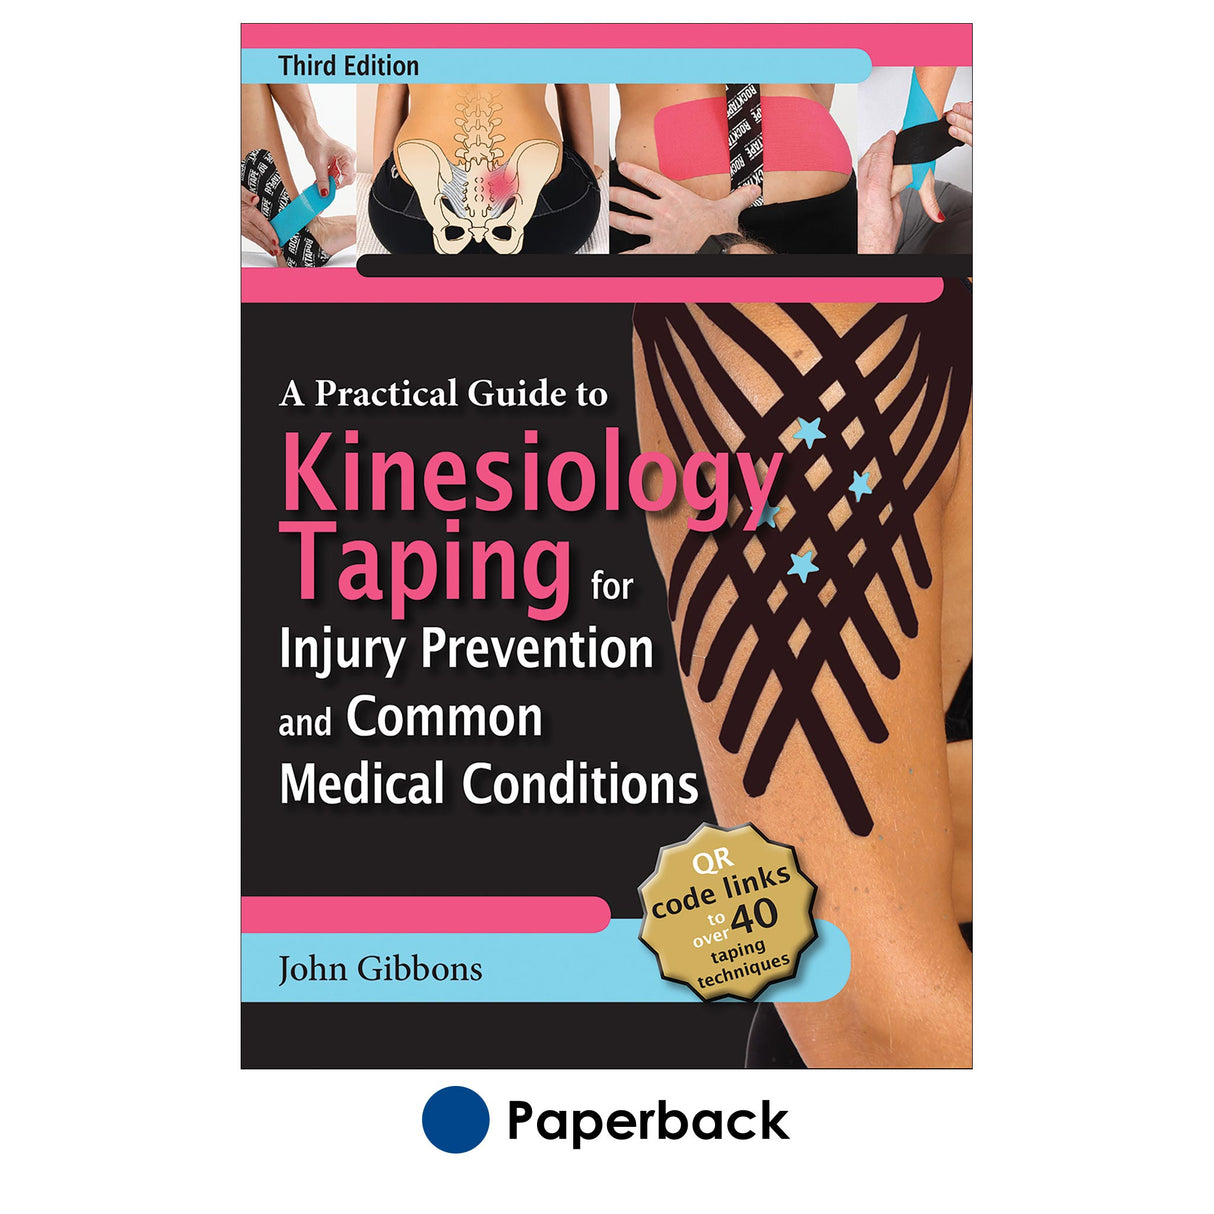 Practical Guide to Kinesiology Taping for Injury Prevention and Common Medical Conditions-3rd Edition, A